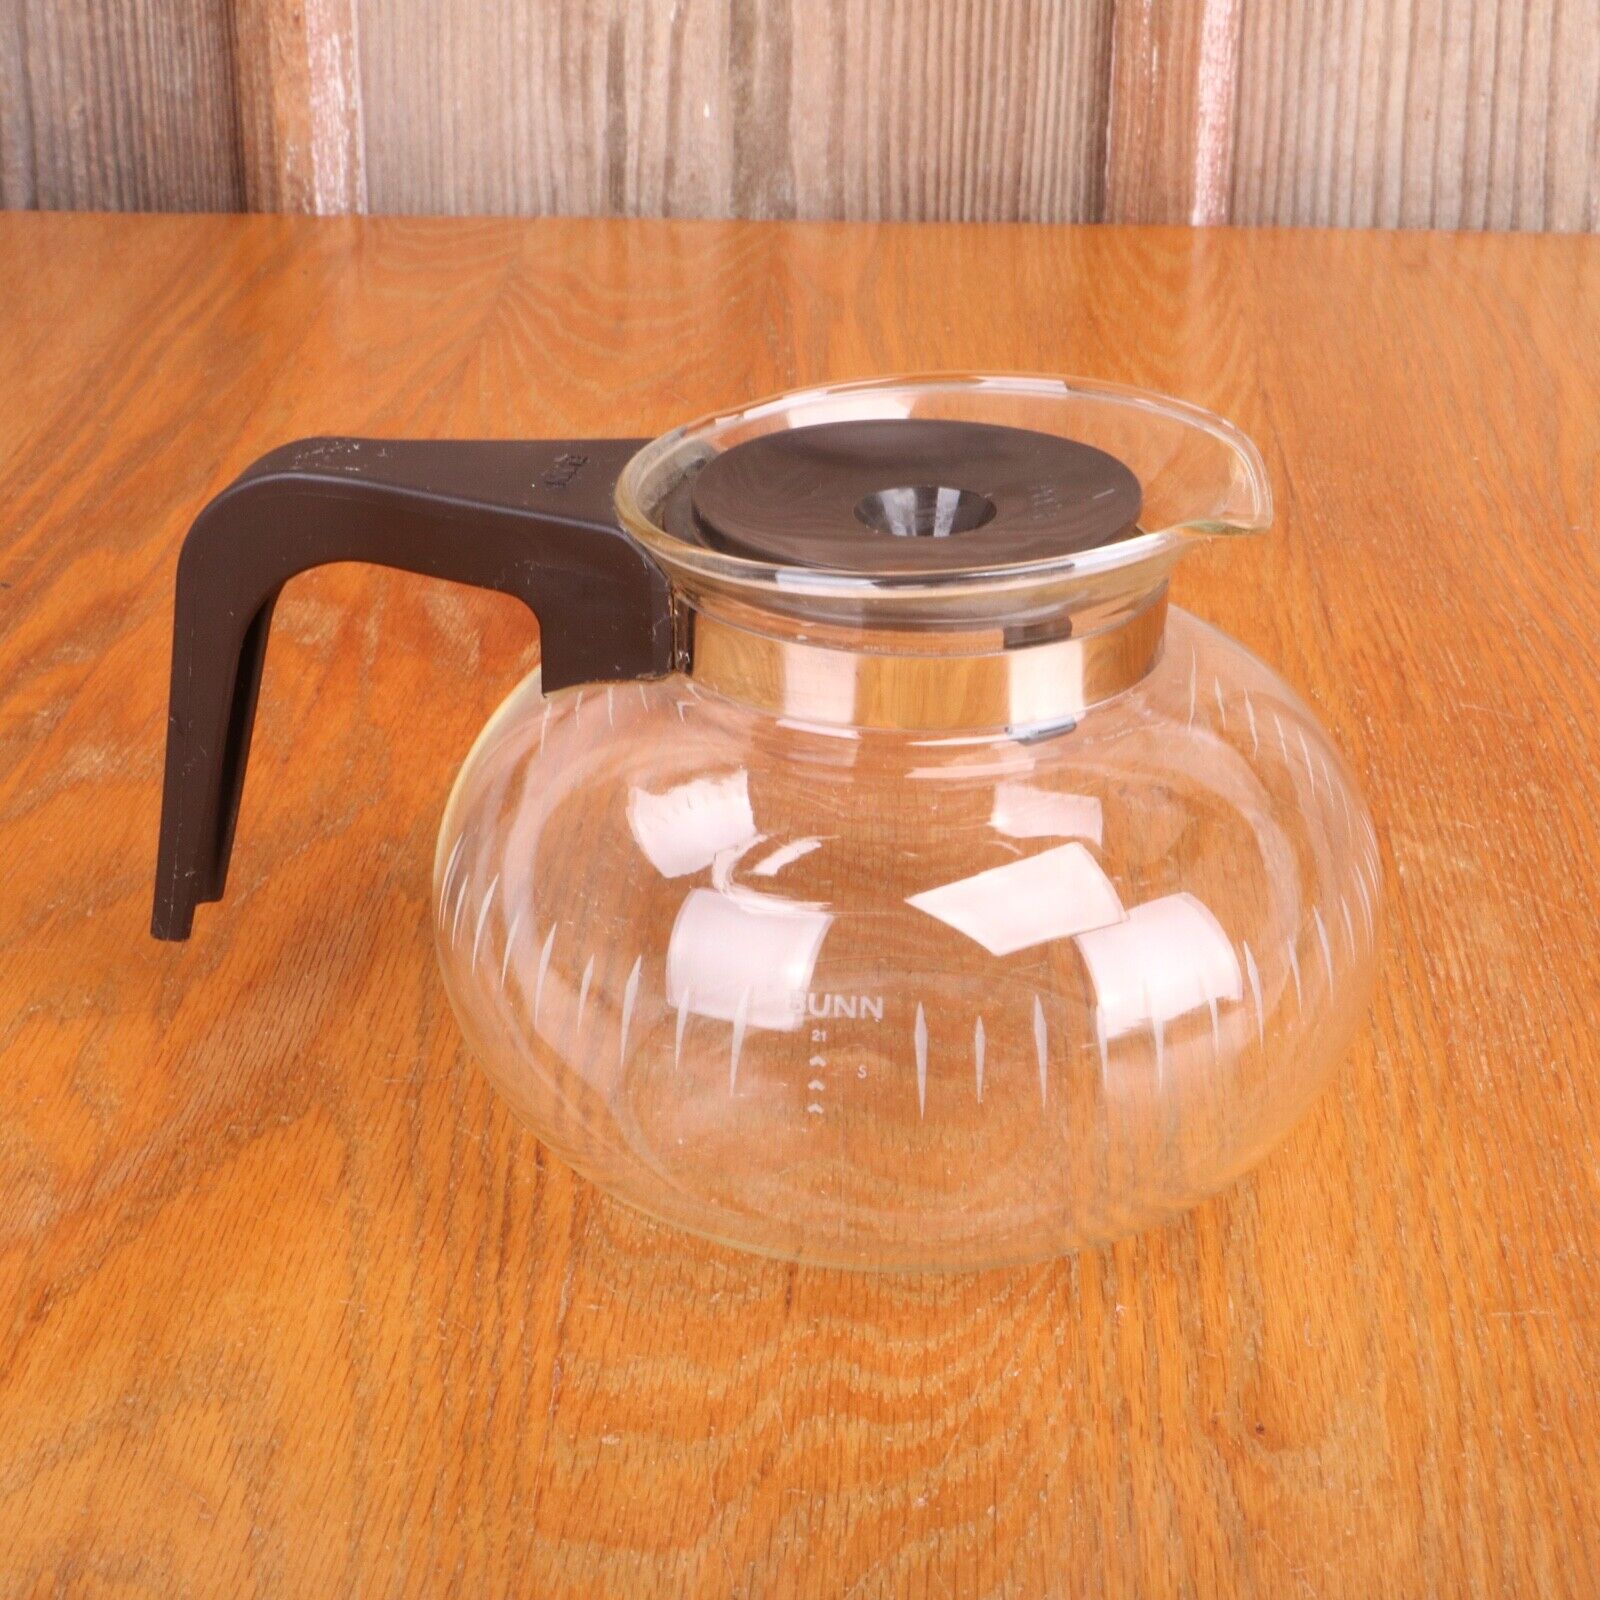 Bunn Glass Replacement Carafe Pot For Coffee Maker Brown Lid Handle